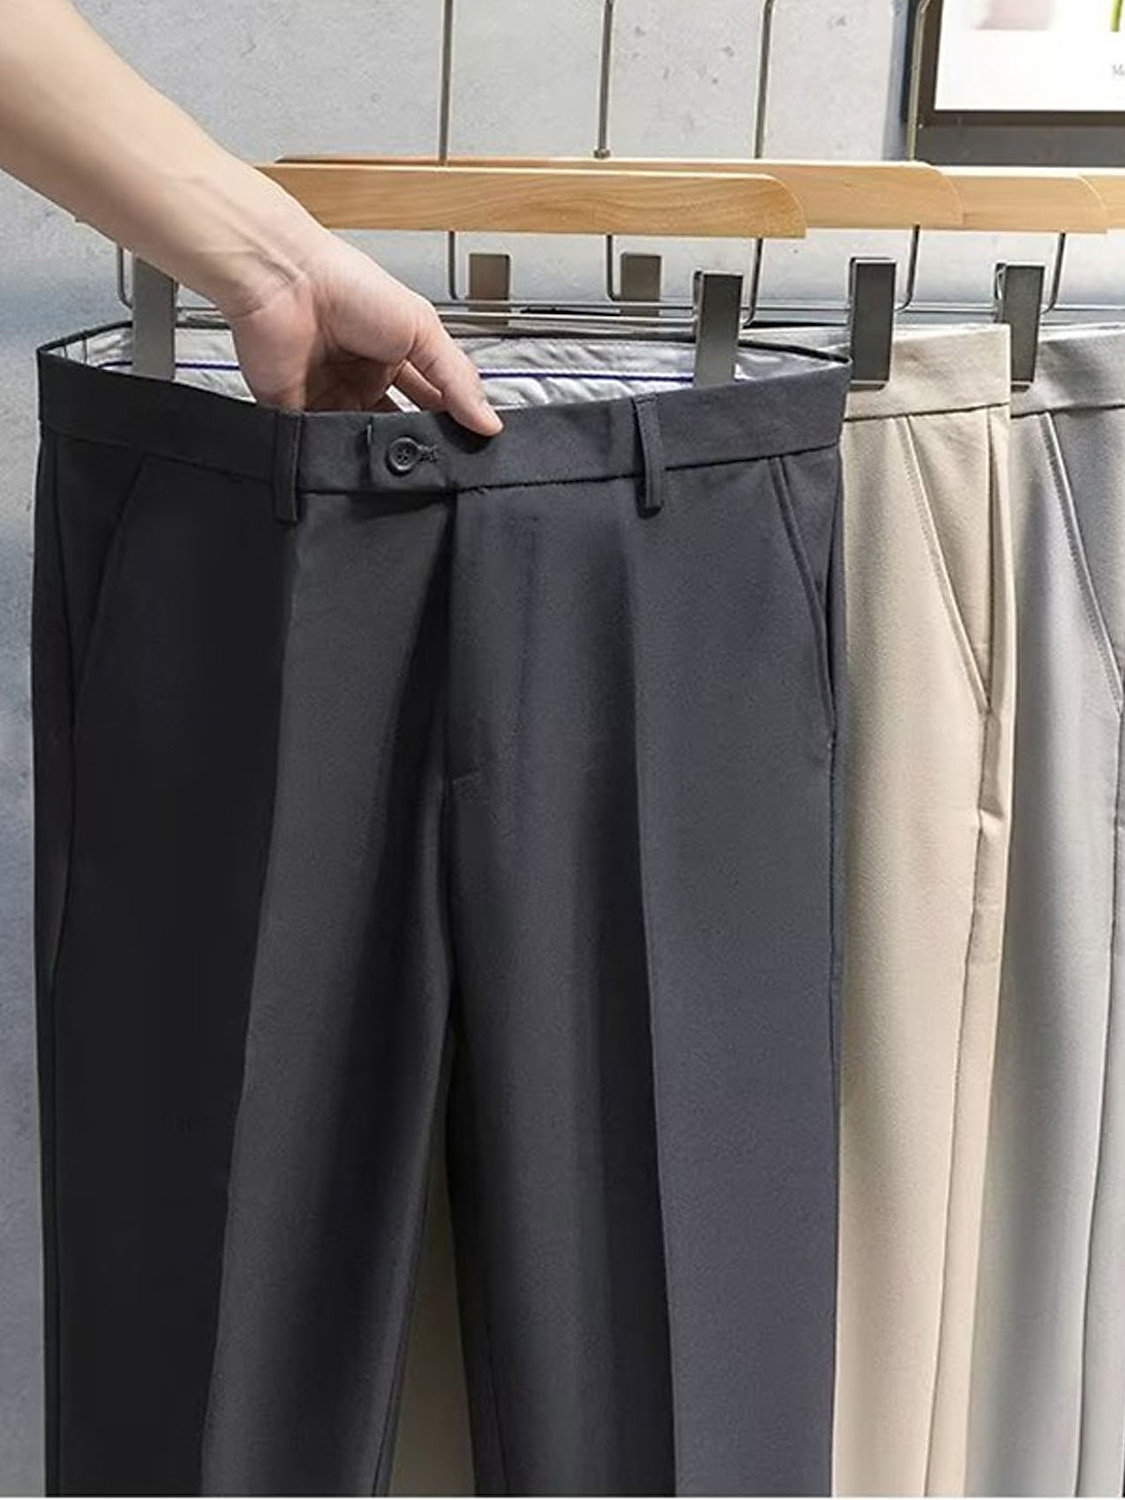 New and used Men's Dress Pants for sale | Facebook Marketplace | Facebook